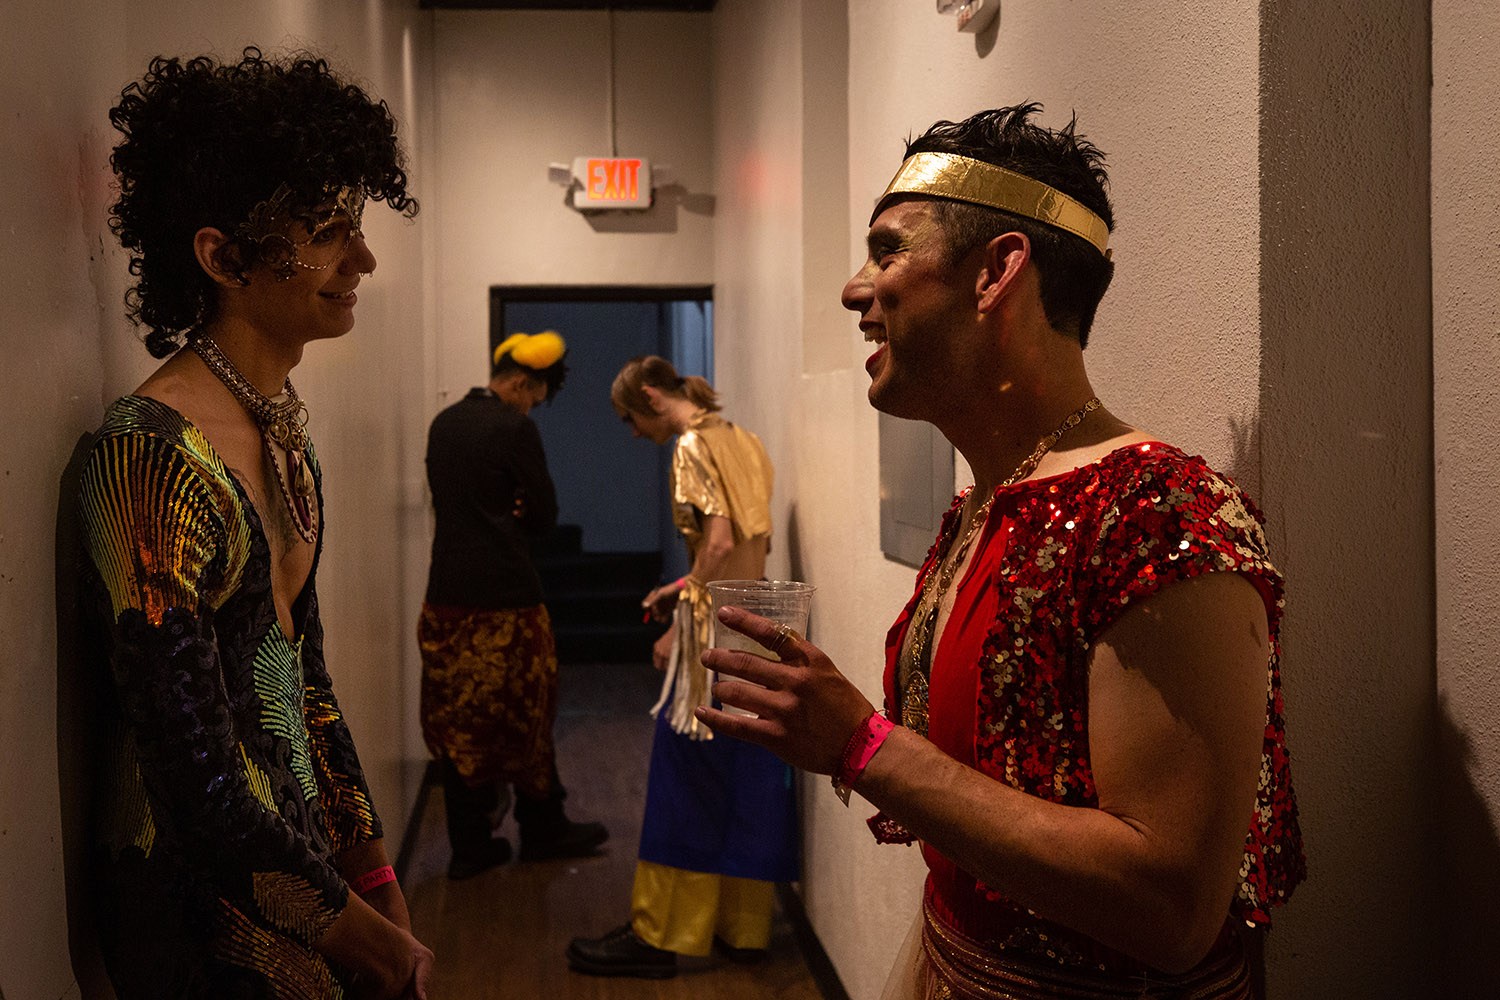 Alejo Peña Soto (left) and Adel Hernandez discuss switching accessories before walking in a fashion show wearing designs by Augusto Cuellar during a fashion show during the WEBB Party on Friday night, April 1, 2022, at the Aztec Theater in downtown San Antonio, Texas. Photo by Kaylee Greenlee Beal | Heron contributor